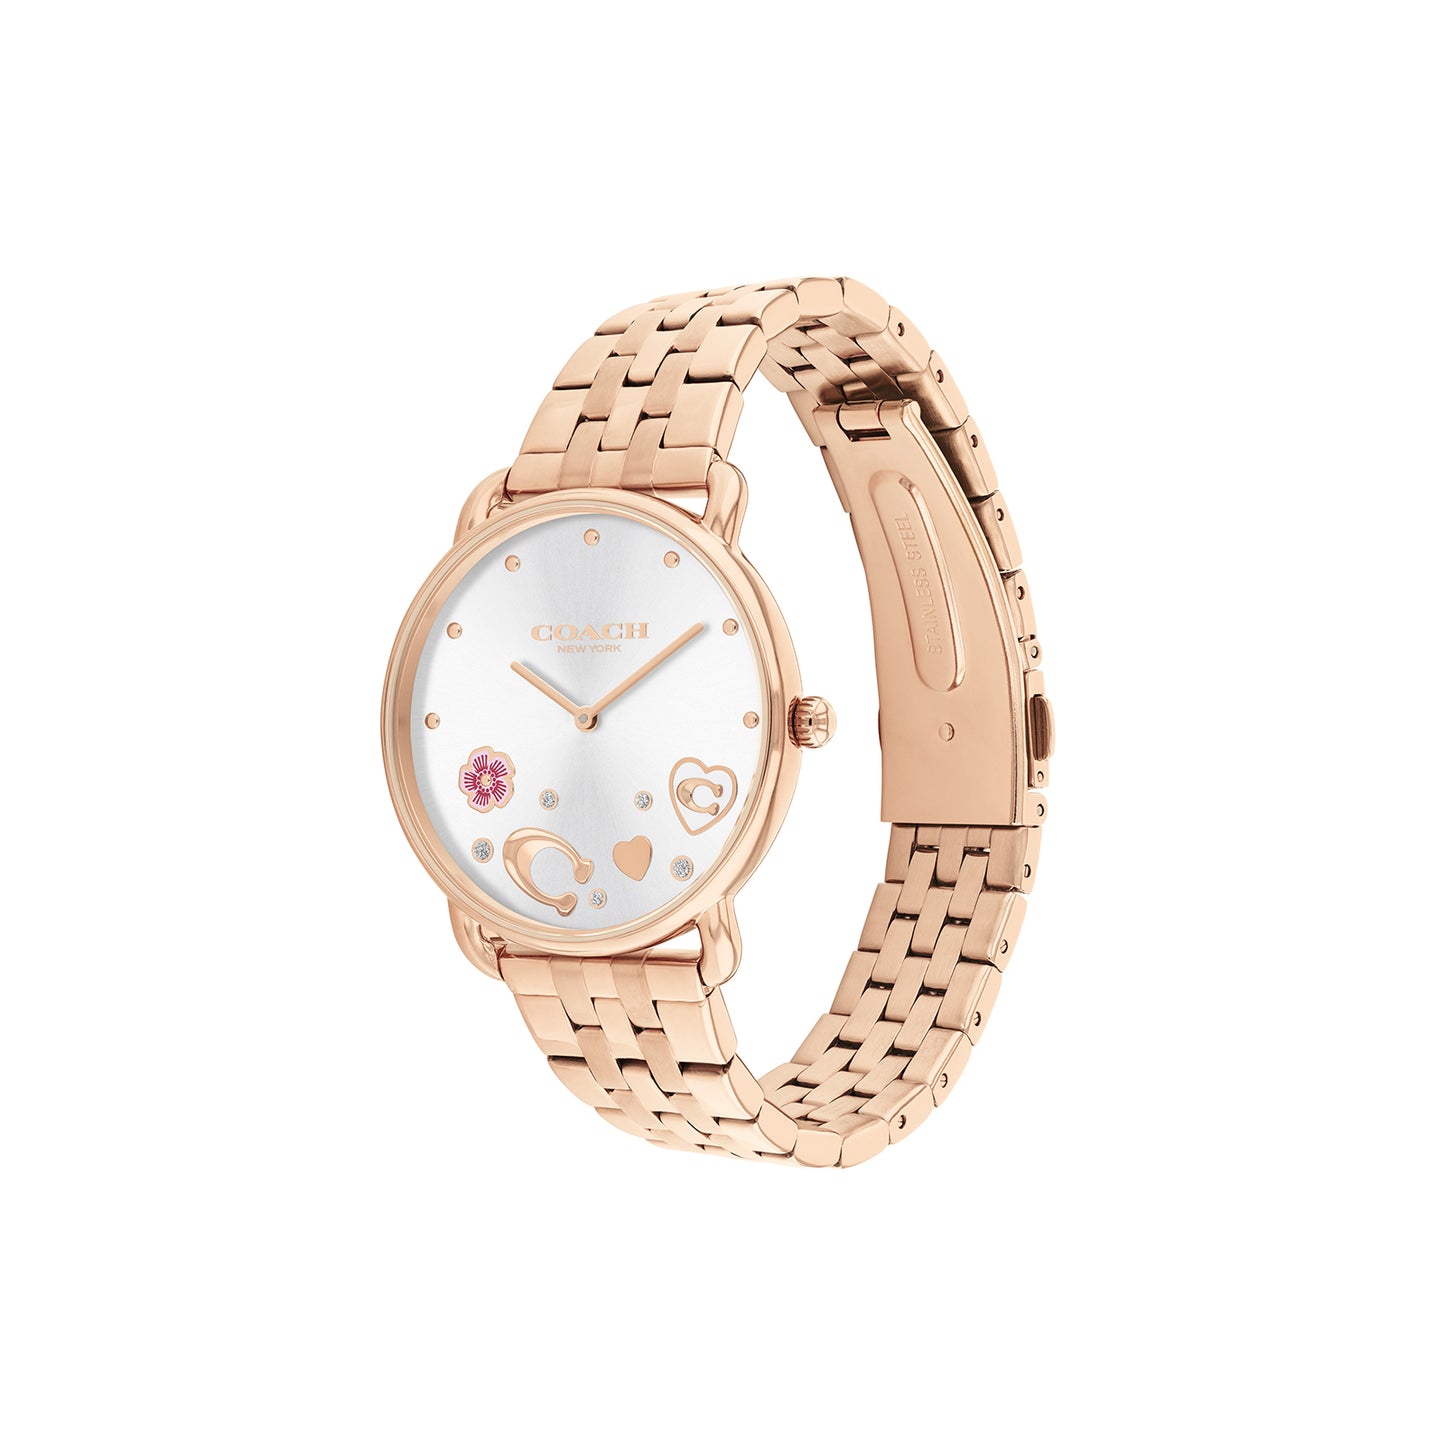 Coach 14504285 Women's Ionic Rose Gold Plated Steel Watch